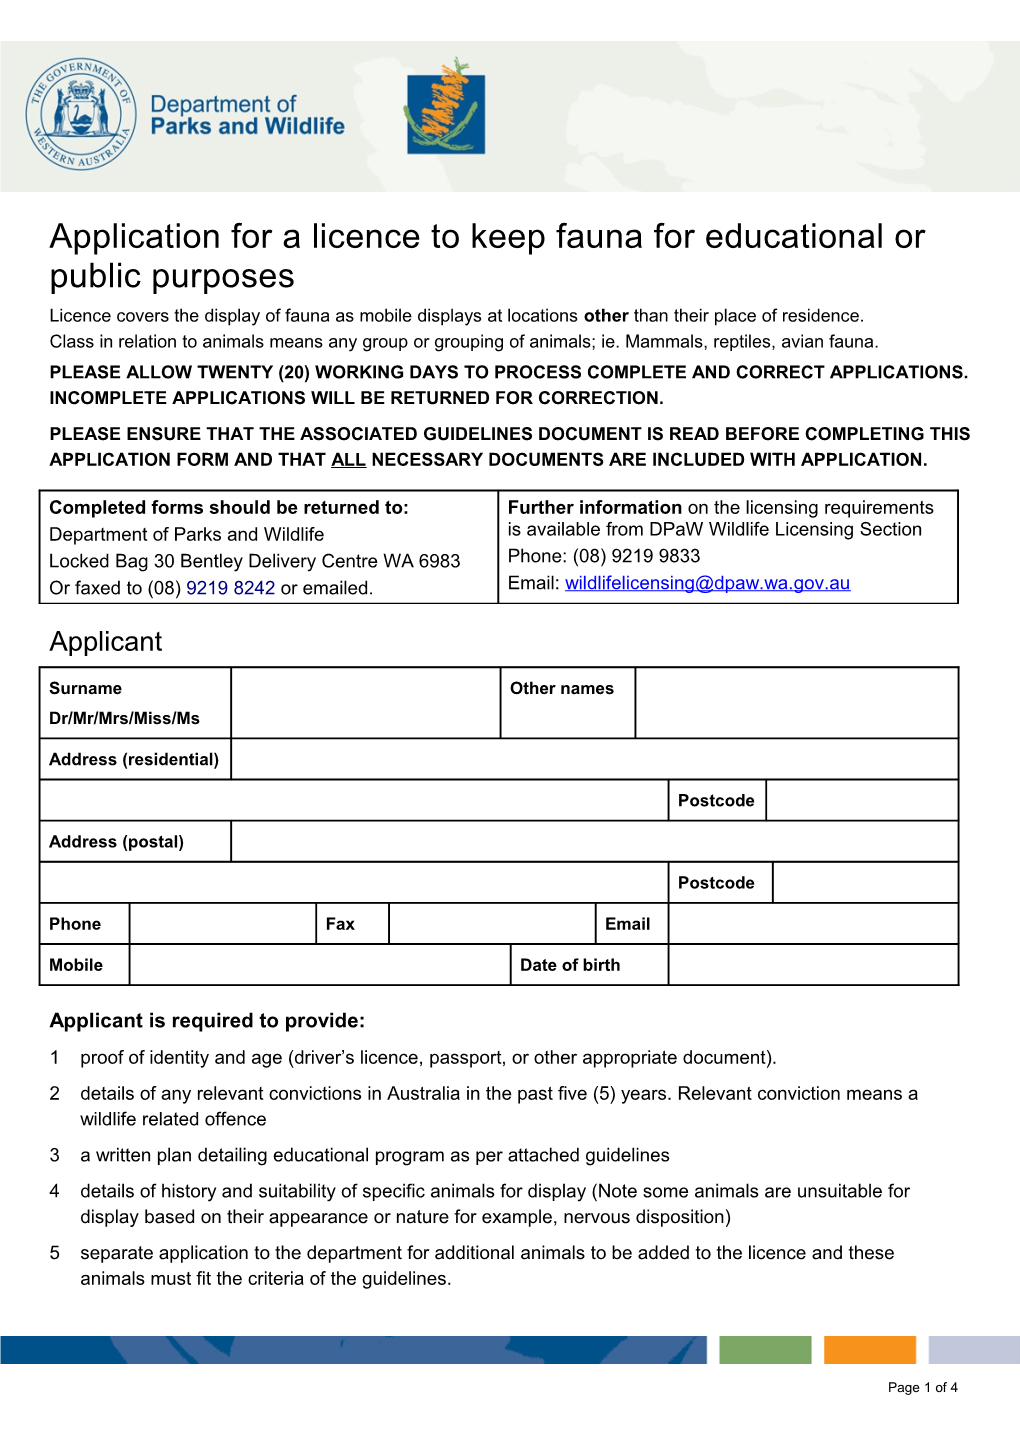 Application for a Licence to Keep Fauna for Educational Or Public Purposes